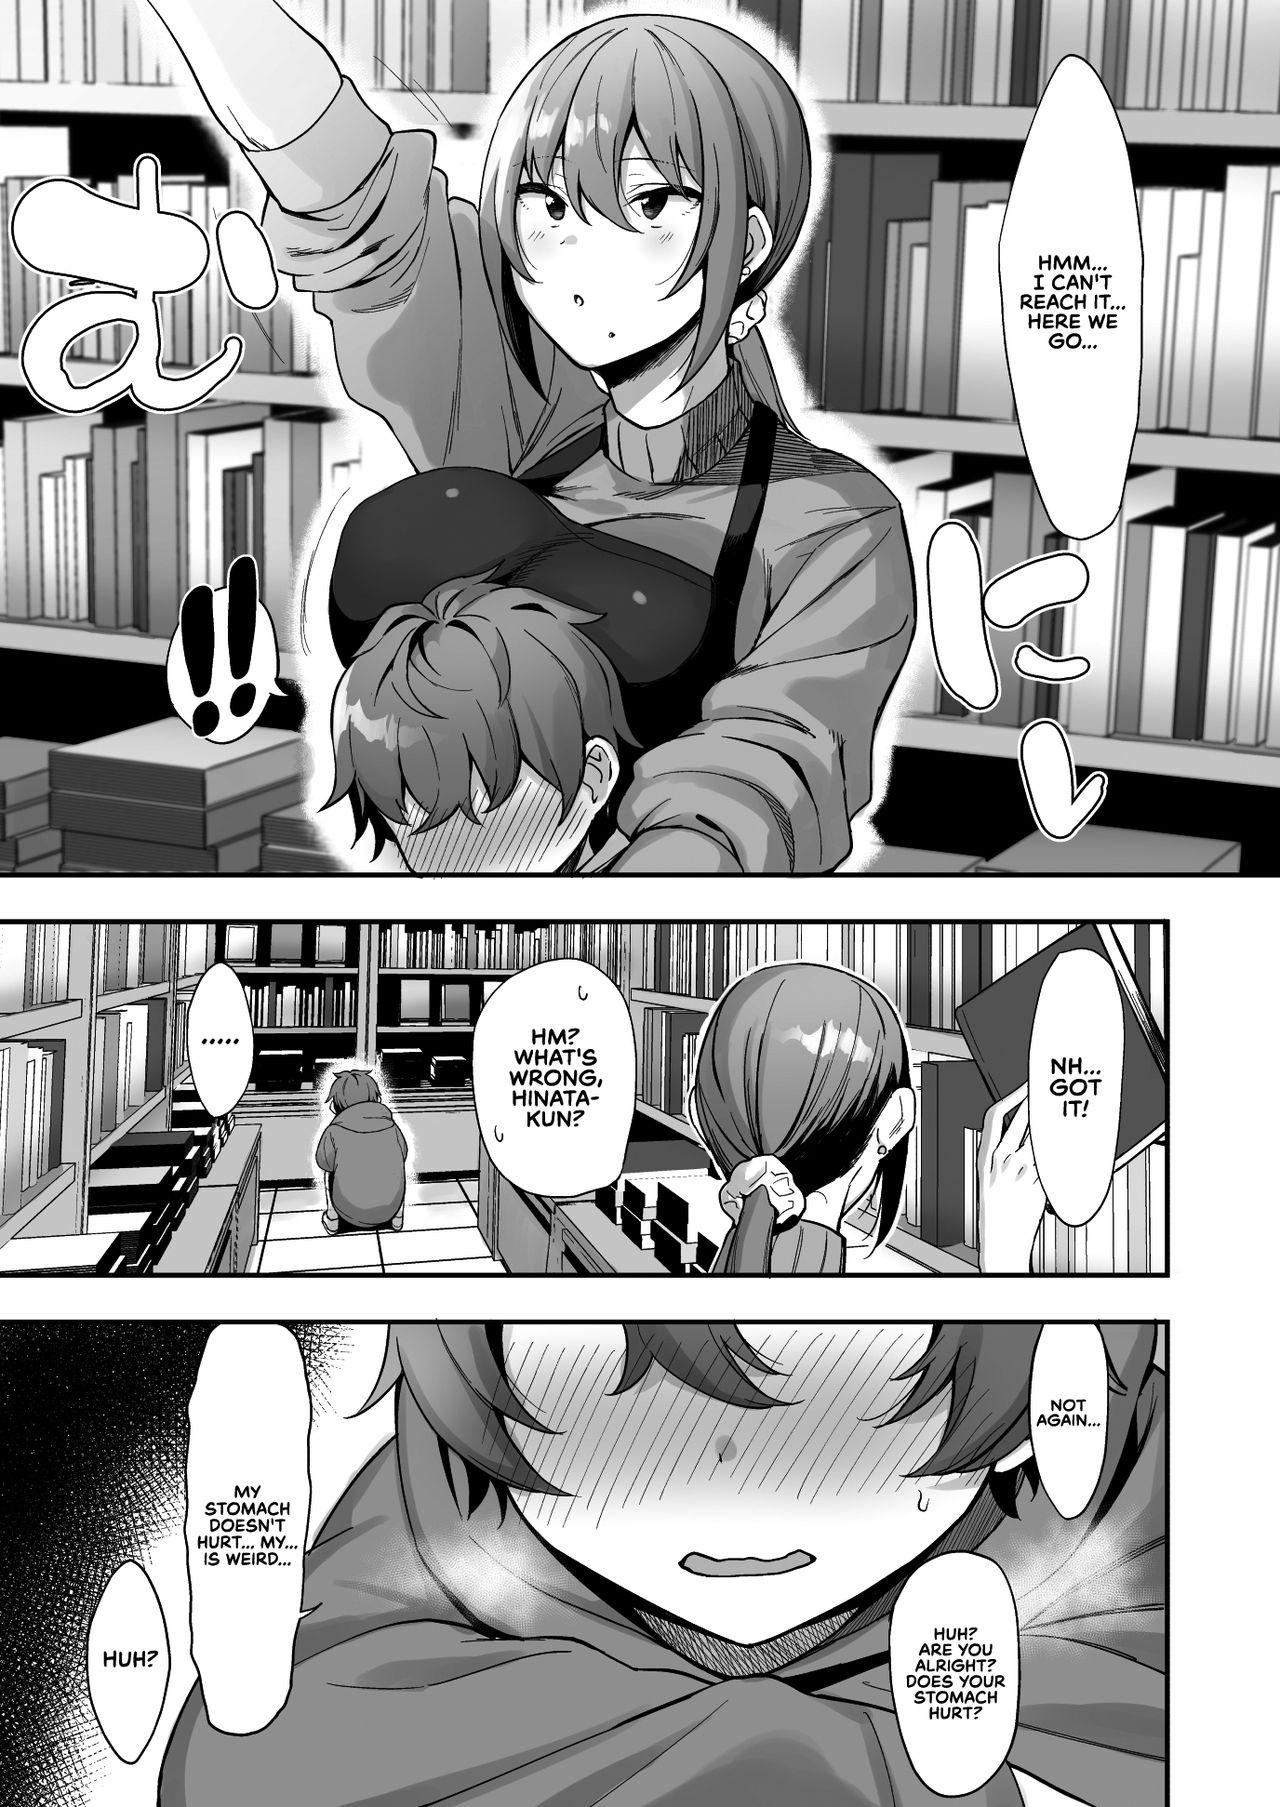 Fake Tits Furuhonya no Onee-san to | With The Lady From The Used Book Shop - Original Hair - Page 8